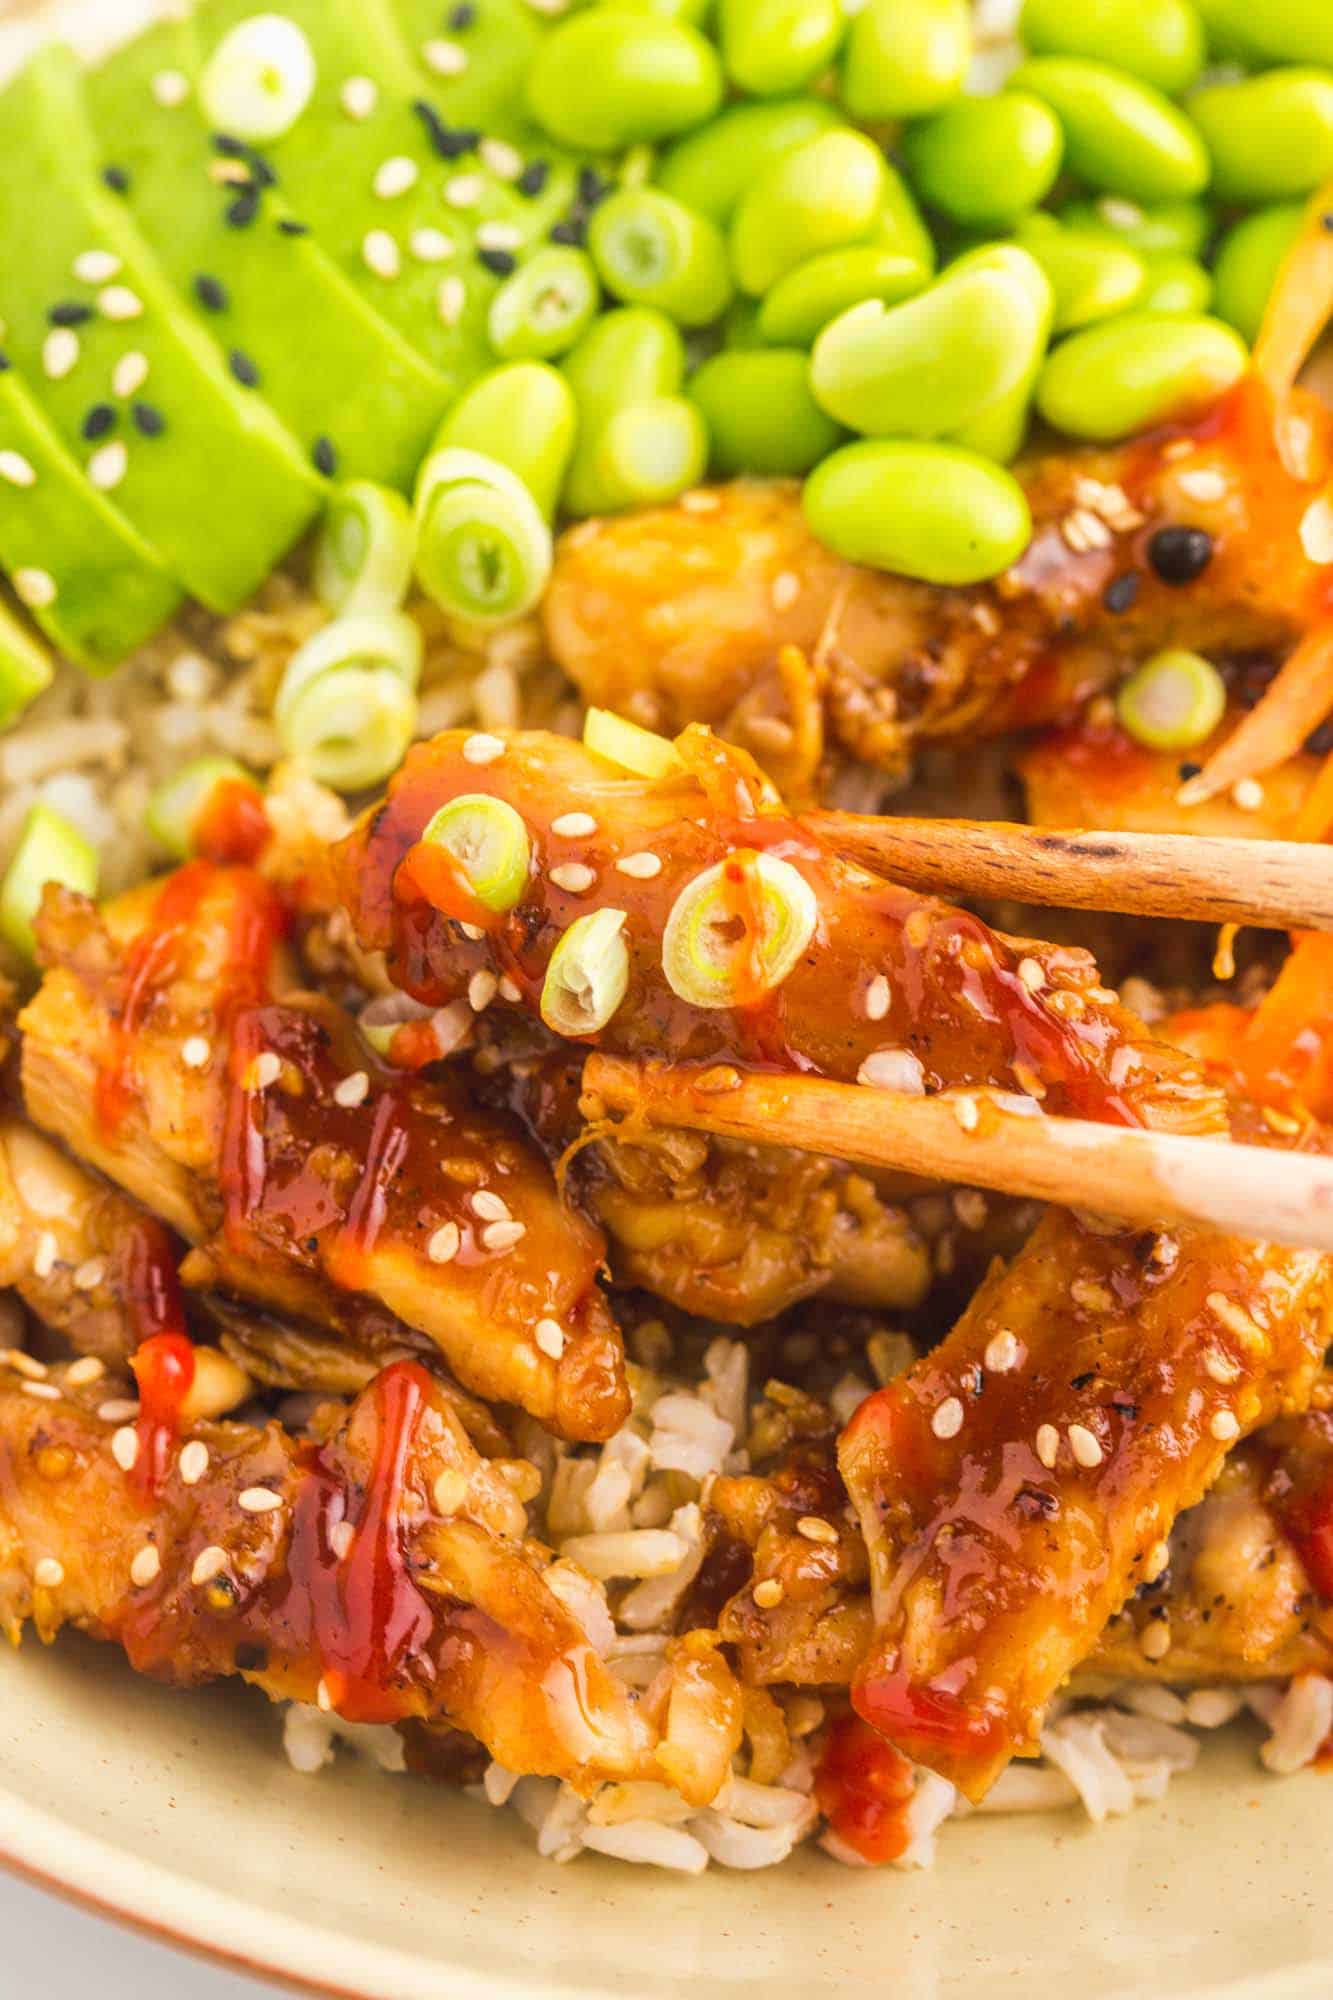 closup view of a bowl of rice, teriyaki chicken, and edamame being eaten with chopsticks.